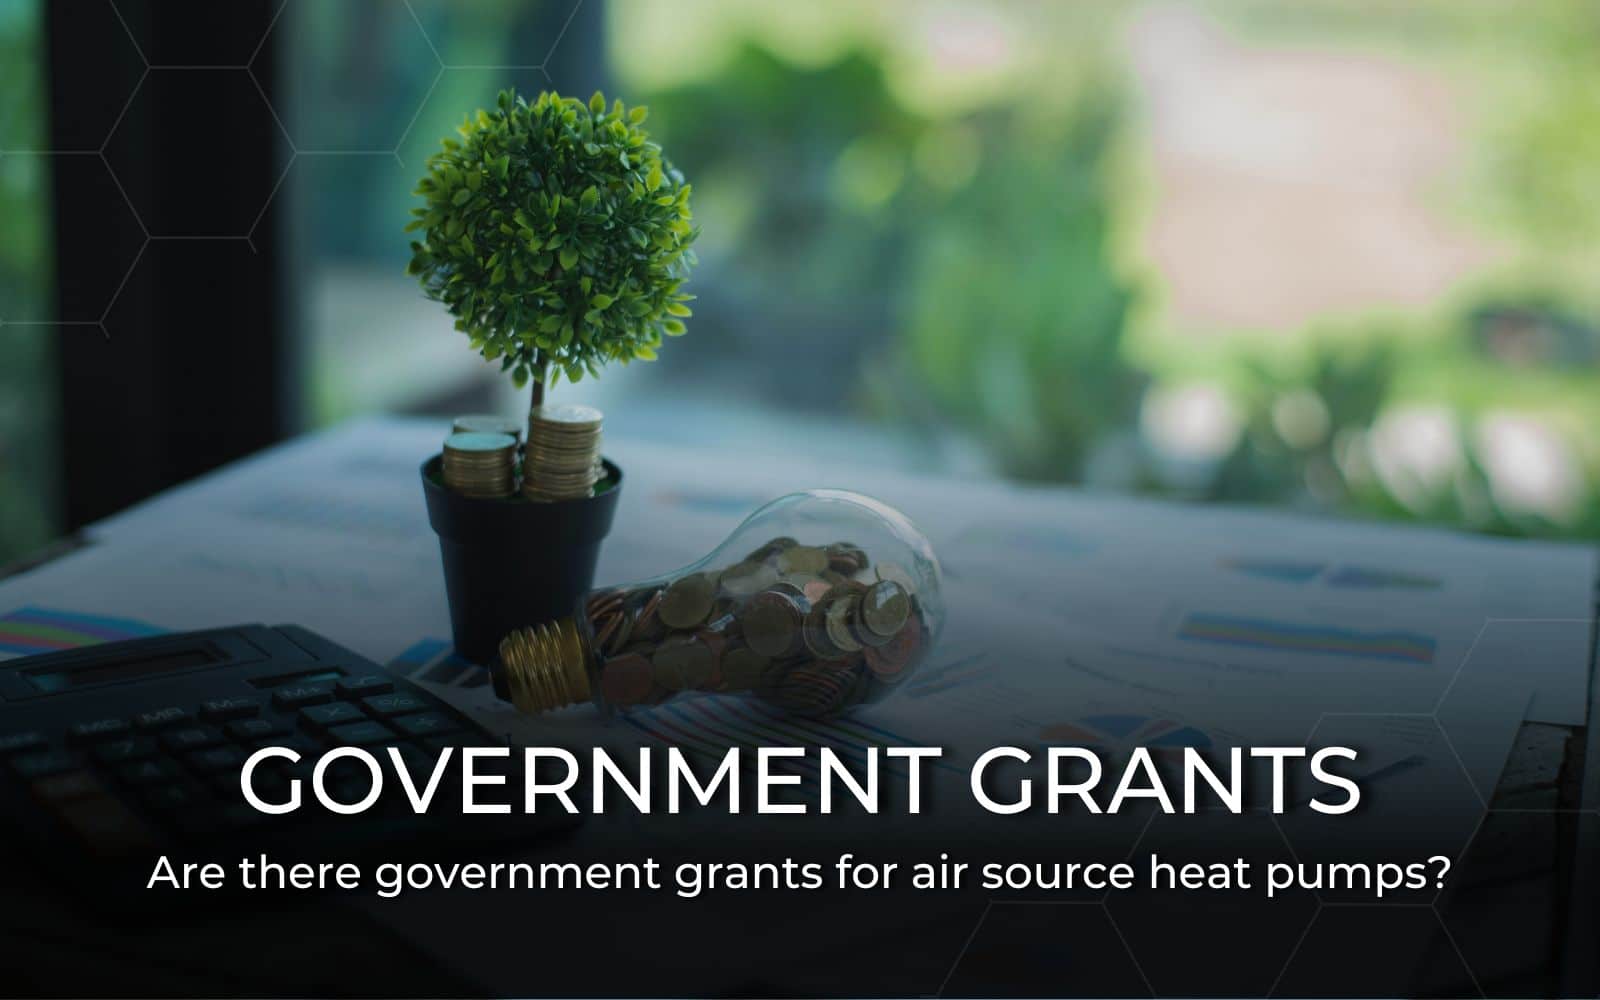 Government grants for heat pumps